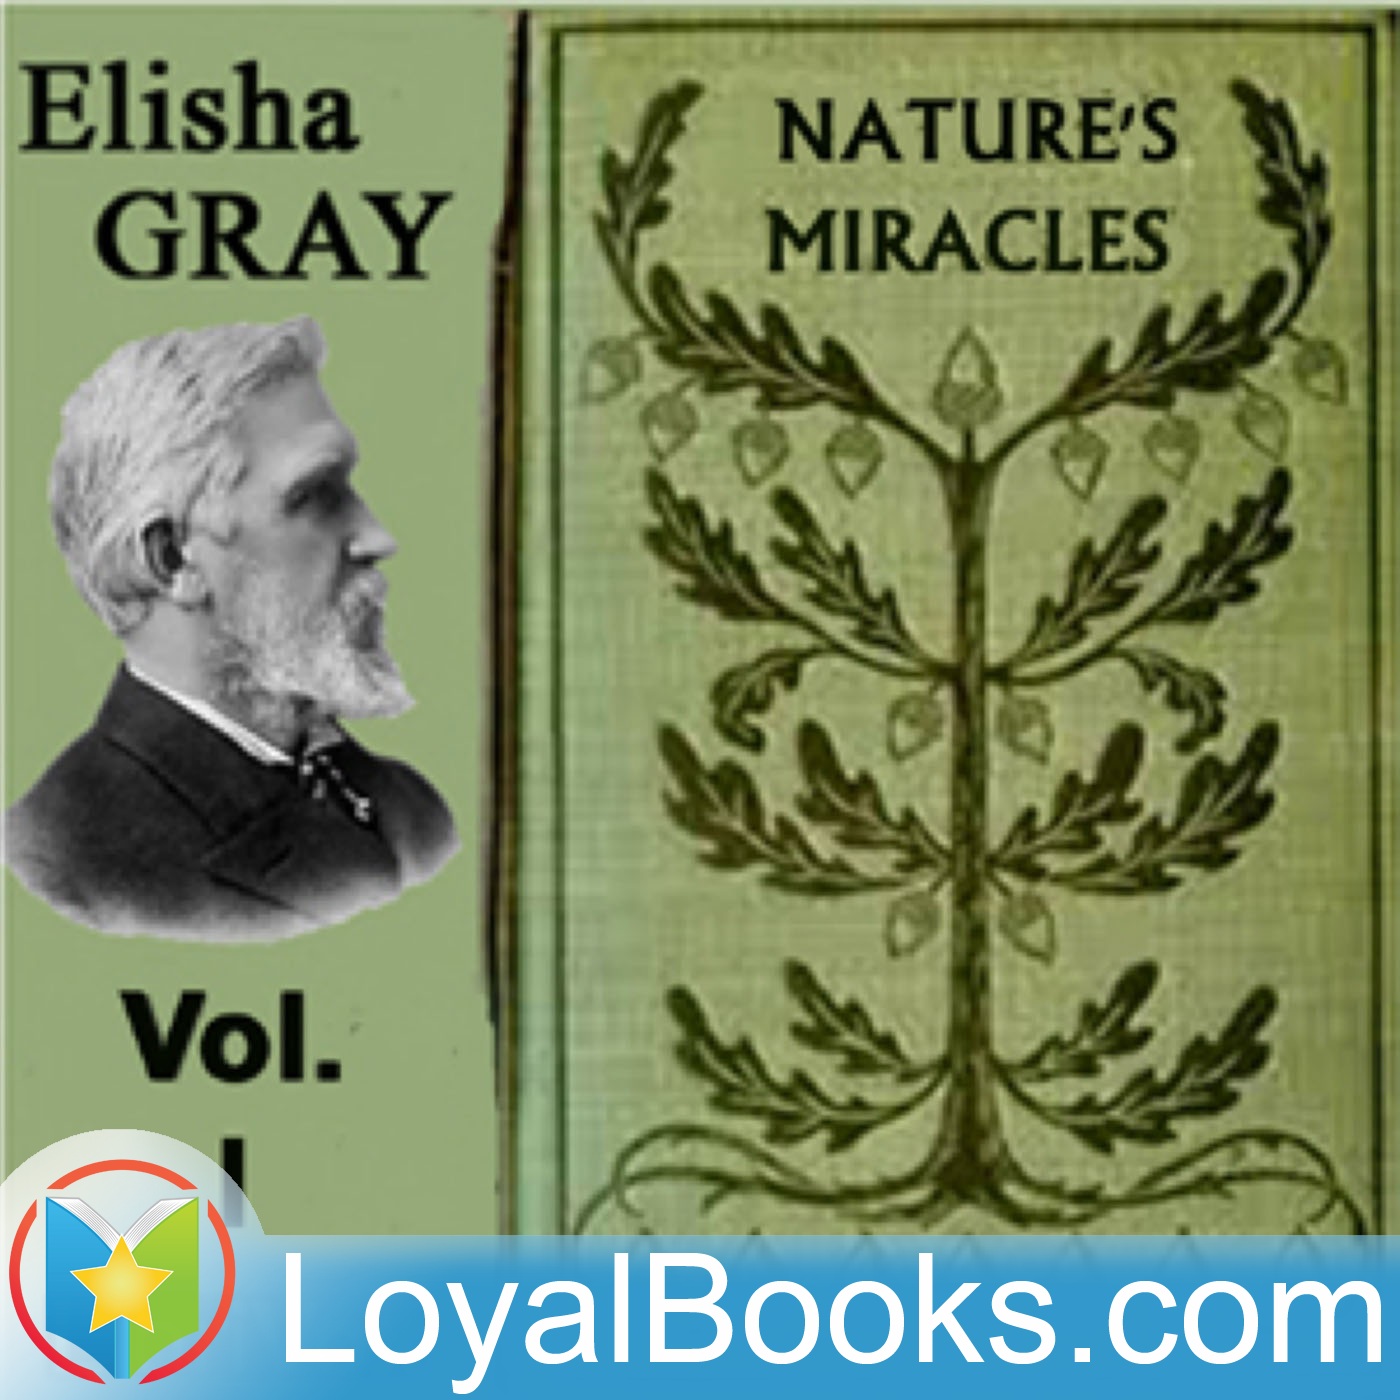 Nature's Miracles: Familiar Talks on Science by Elisha Gray